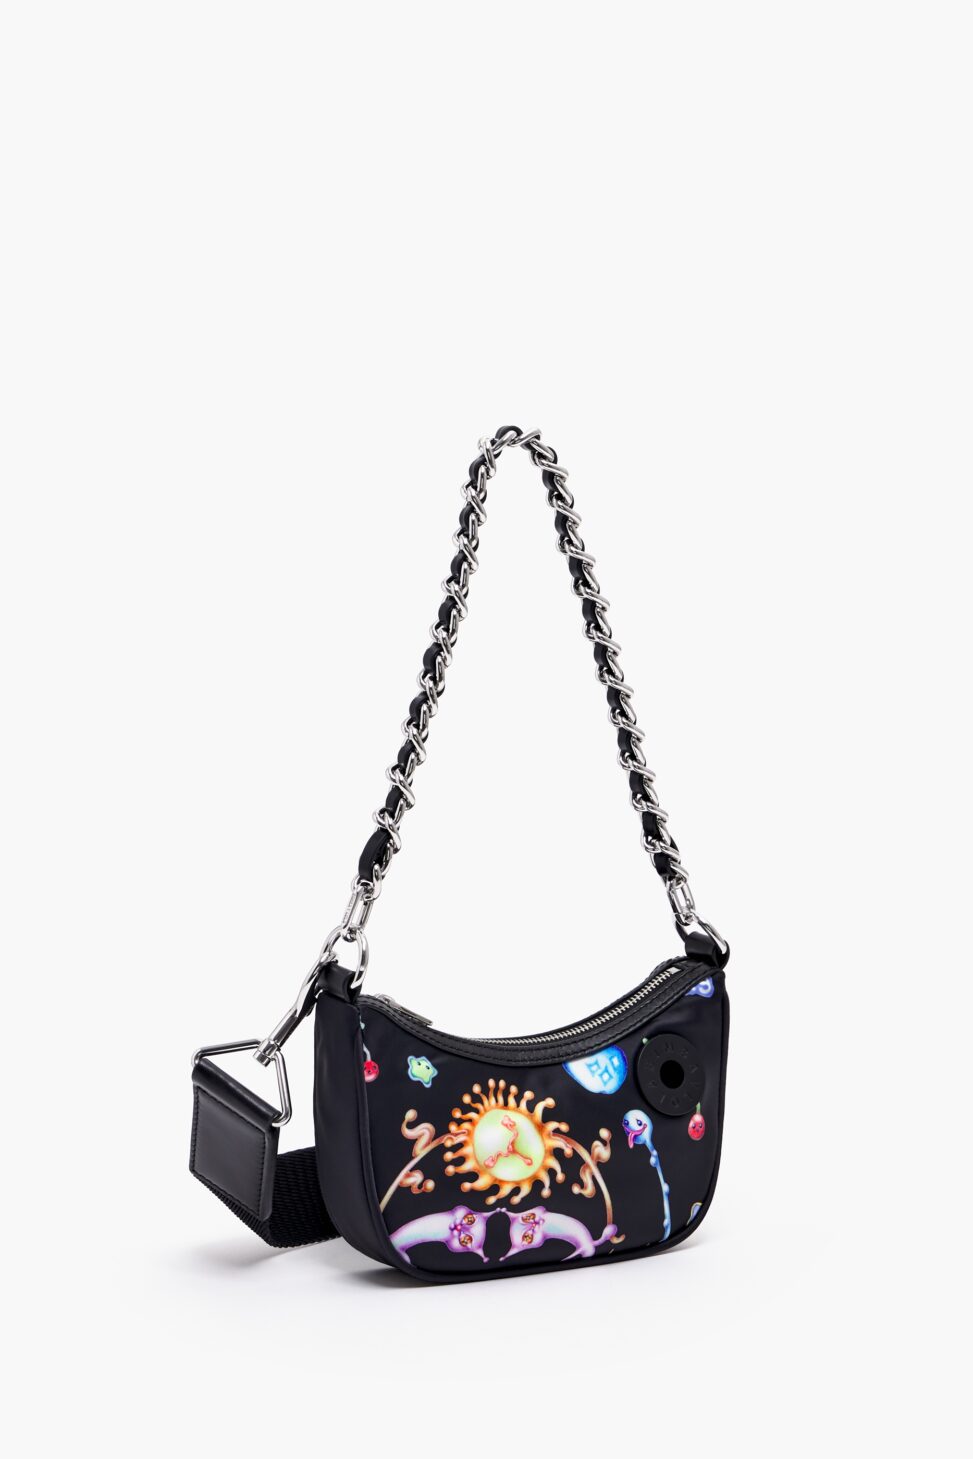 BIMBA Y LOLA by Ema Gaspar: The funniest bag of the season is here